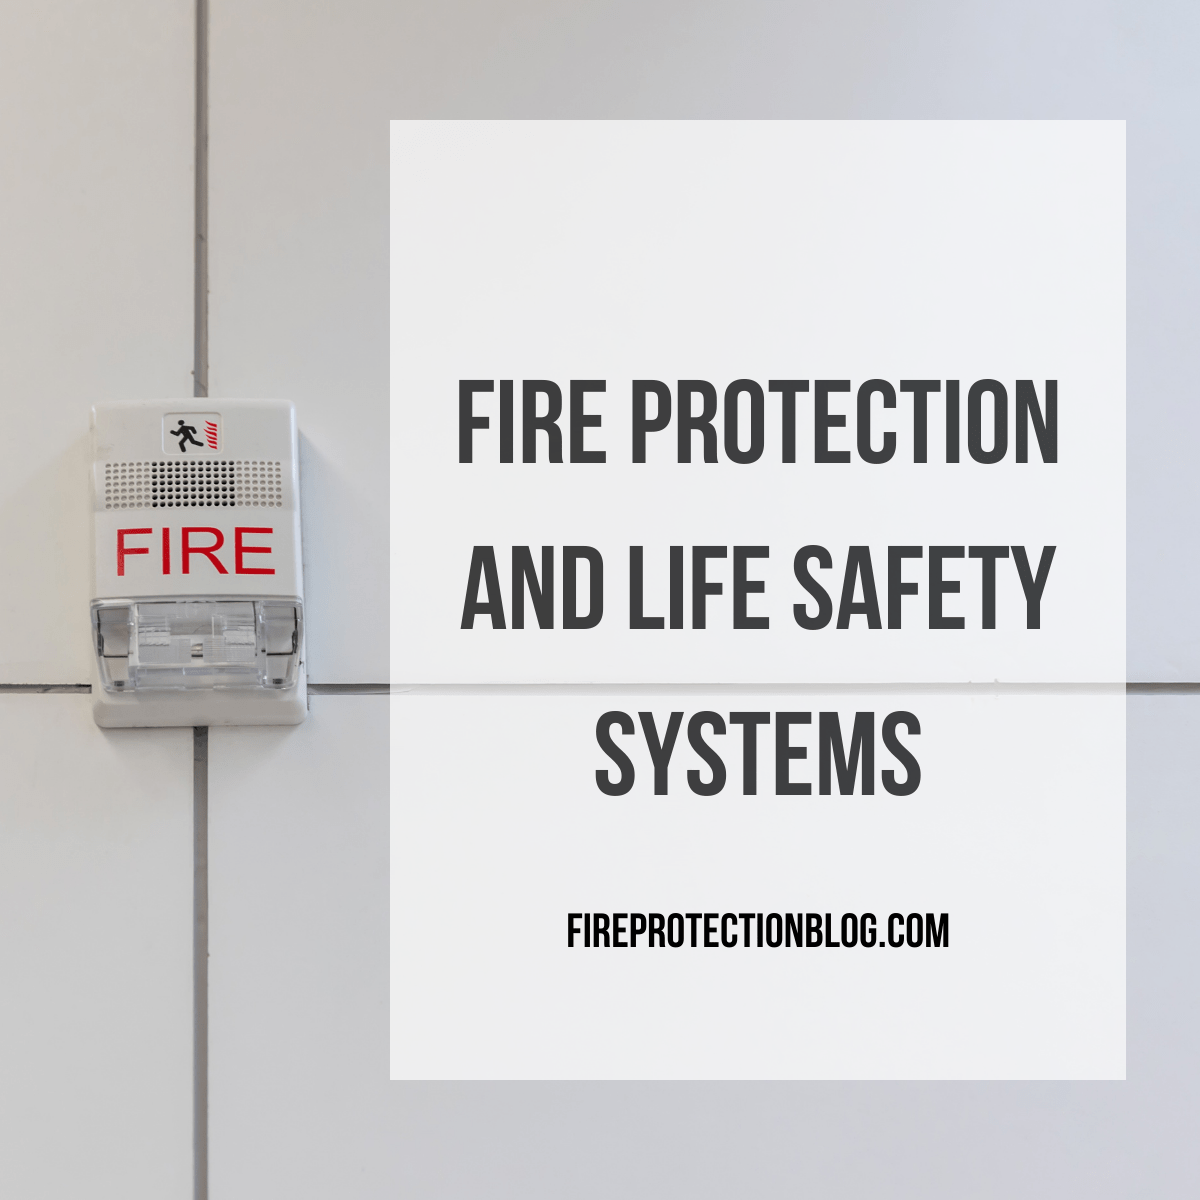 Fire Protection and Life Safety Systems